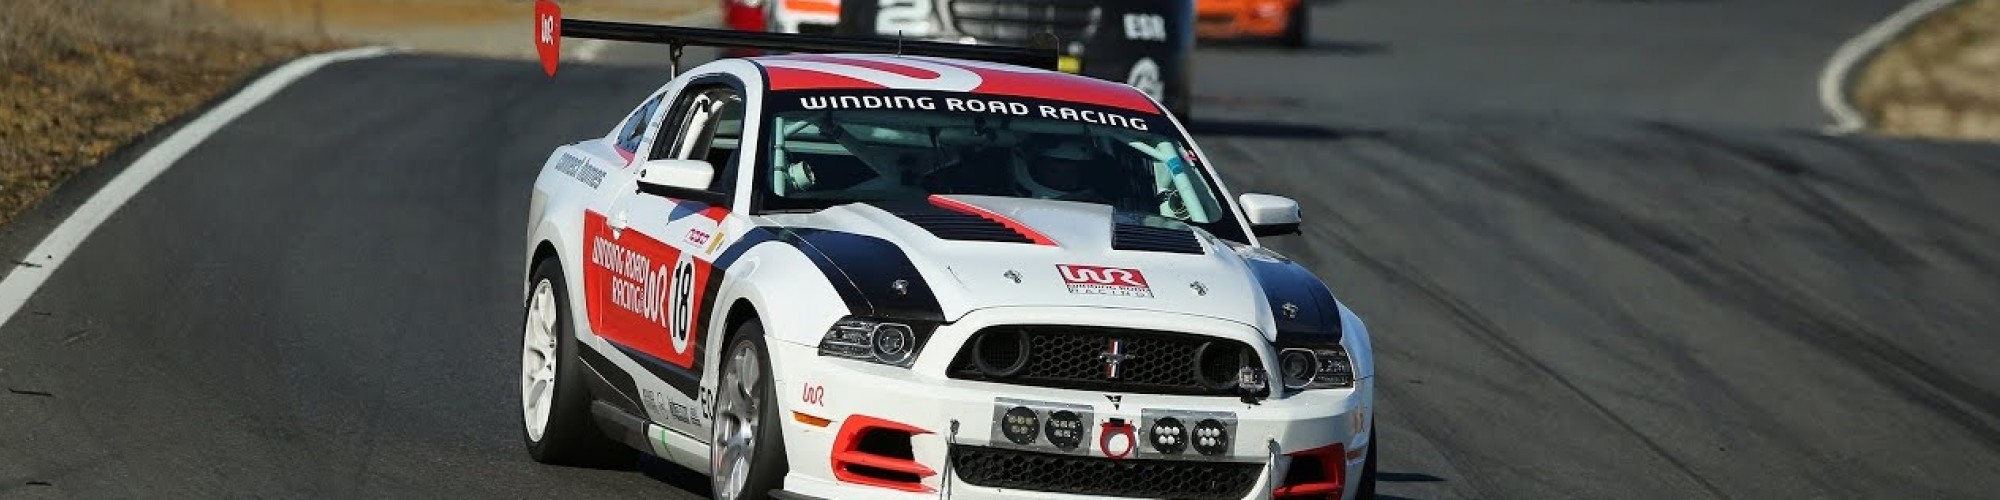 Winding Road Racing cover image